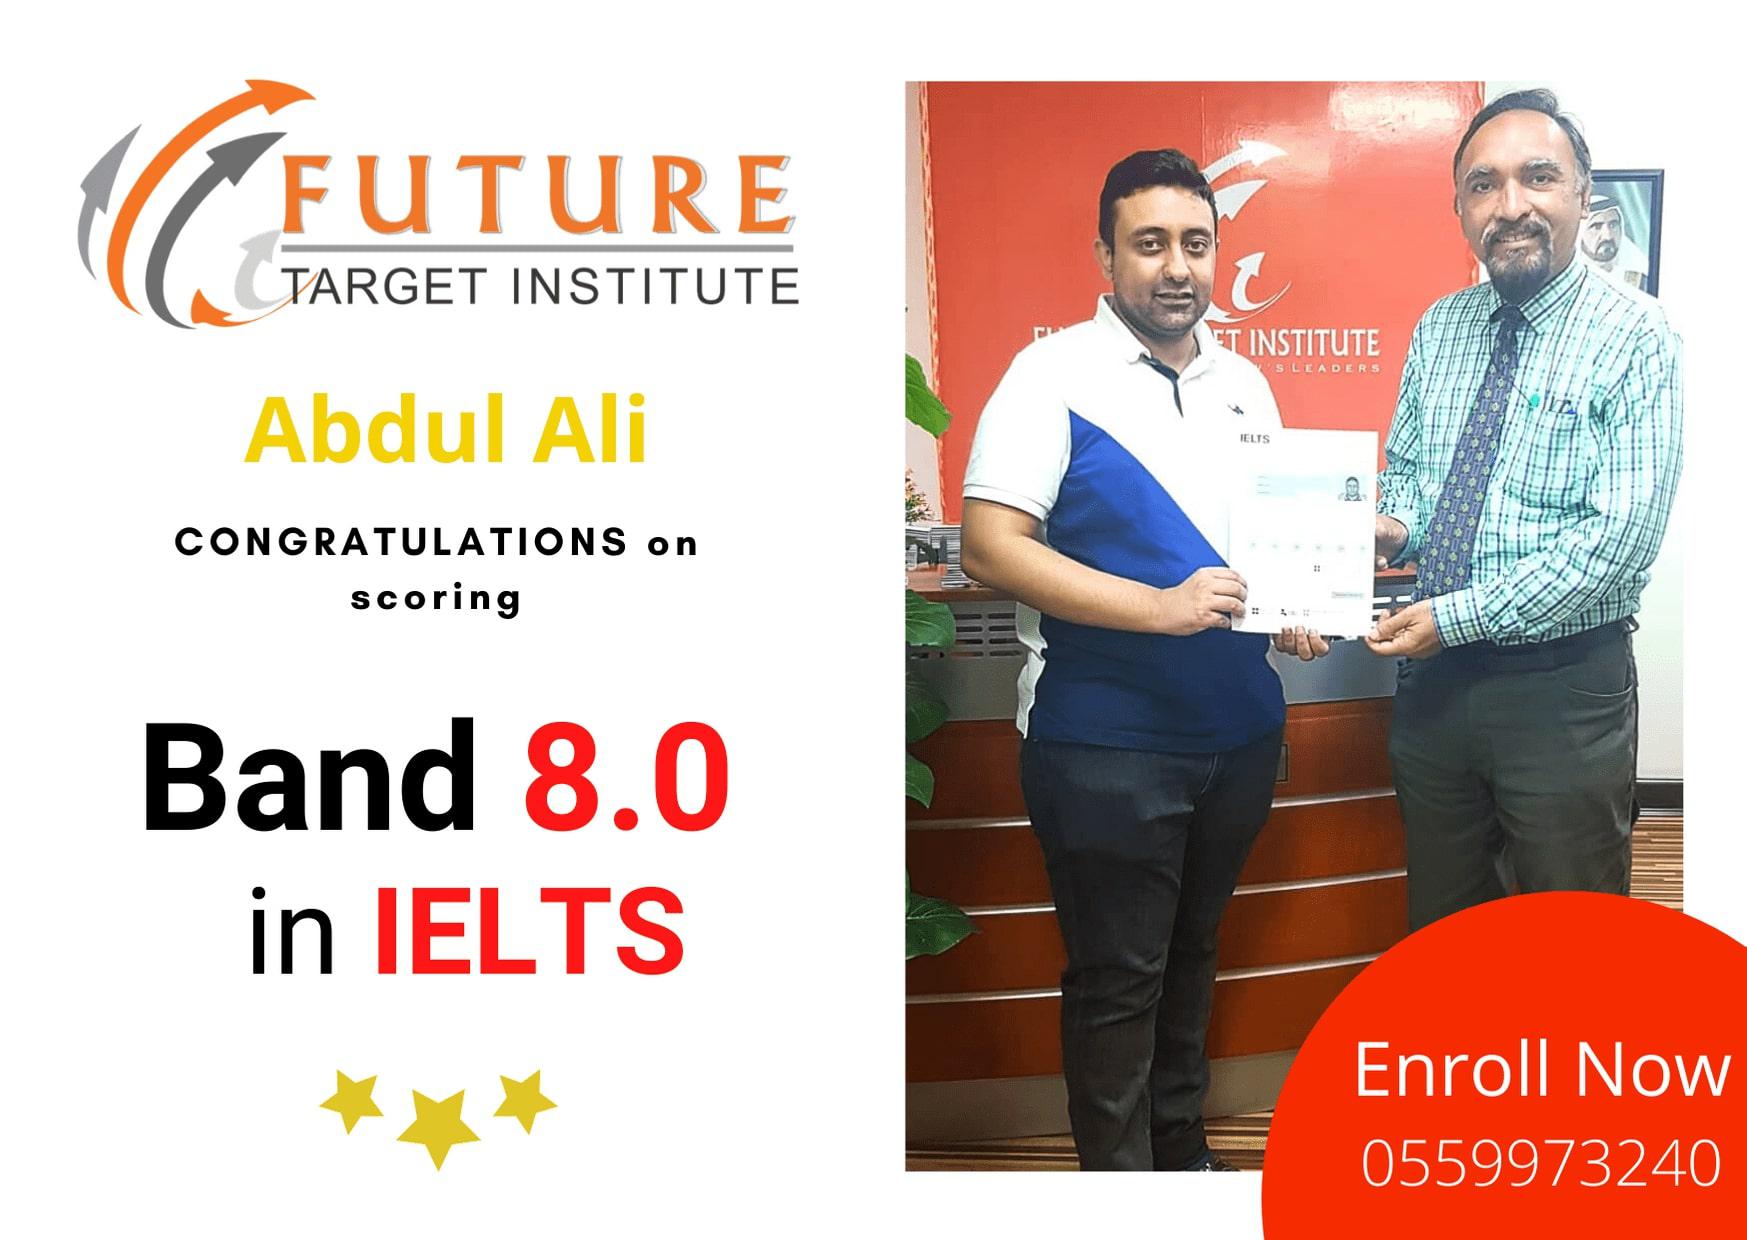 Mr Abdul Ali who improved on his weak areas in the IELTS Reading Practice Test with our preparation course.